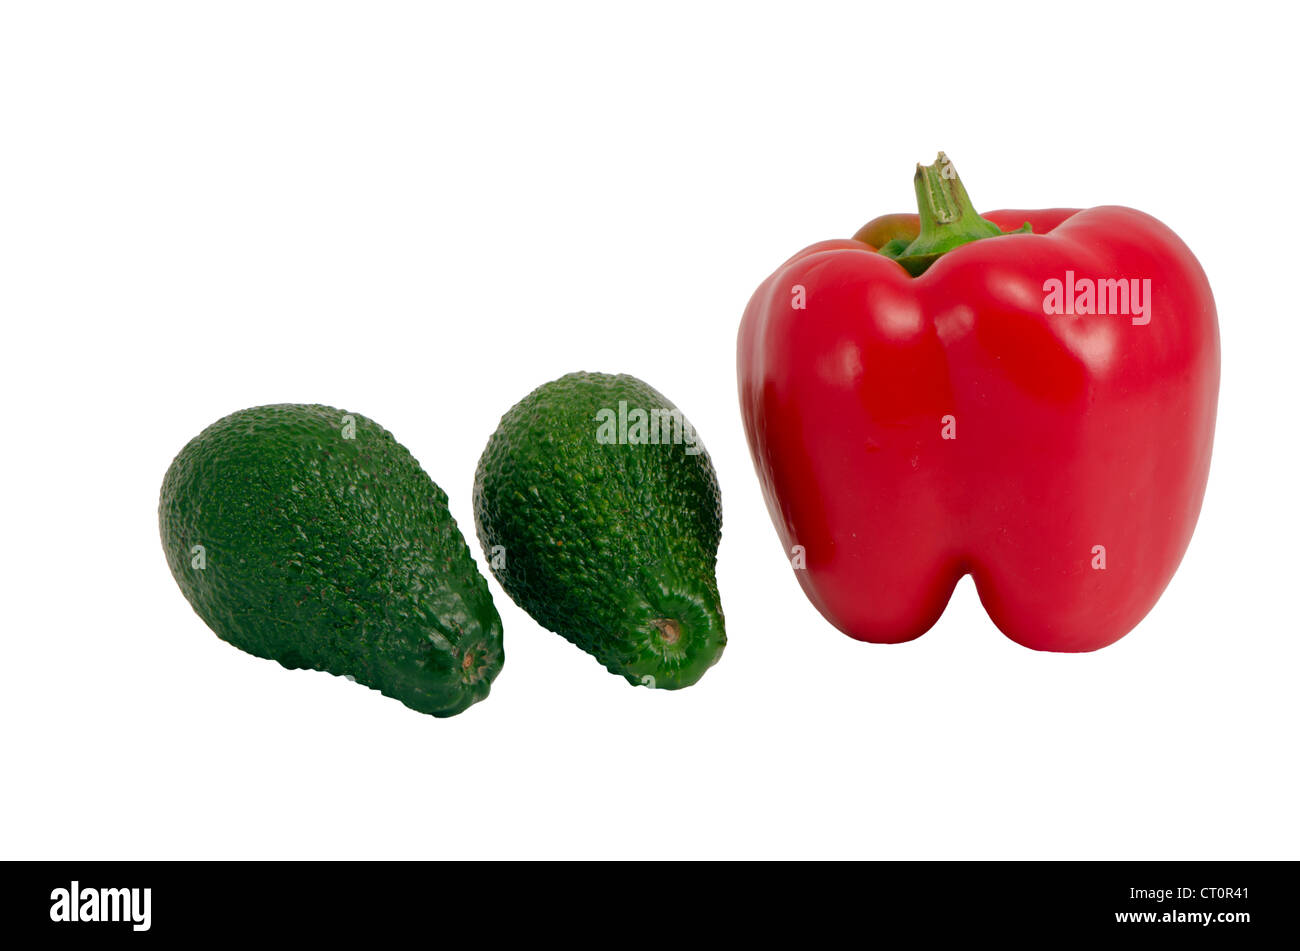 Red chilli pepper paprica and two green avocado isolated on white background. Stock Photo